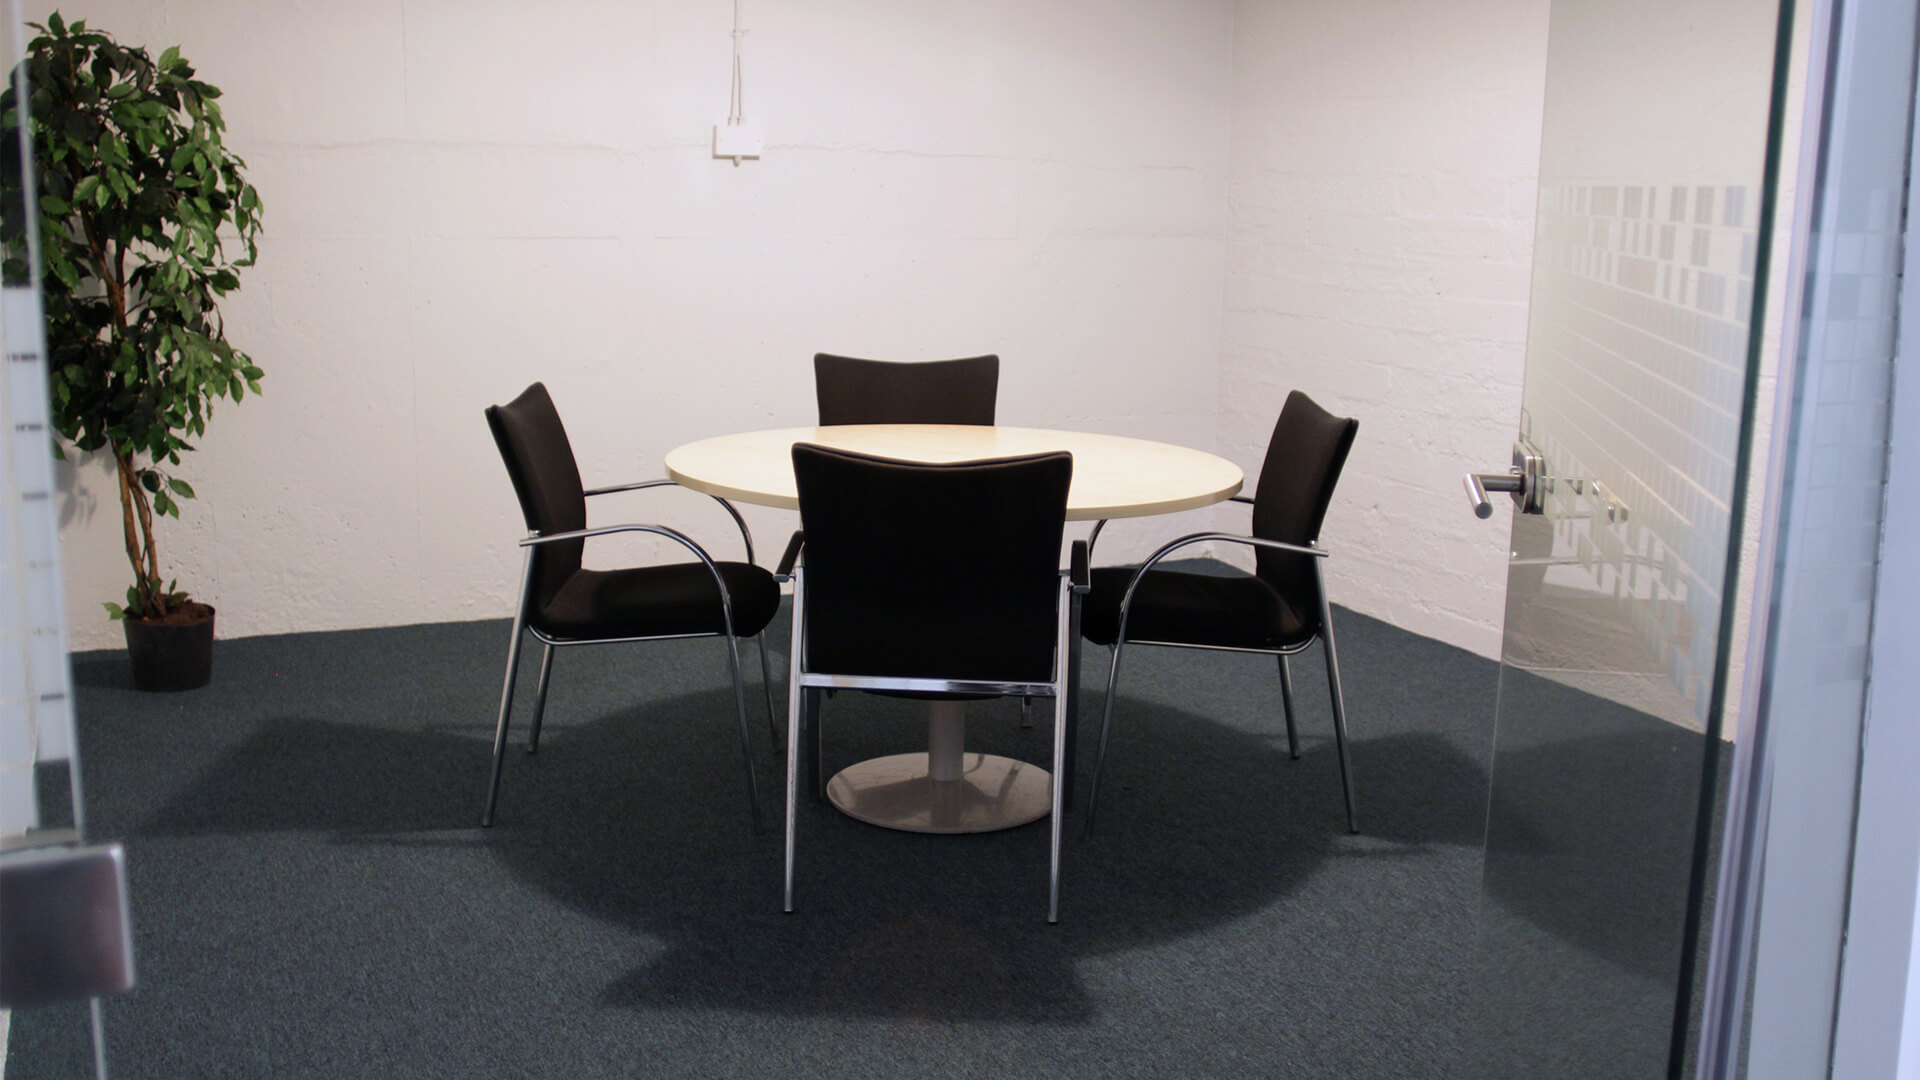 Chairs surround a circular table in an intimate meeting room in the OneFiveSeven building